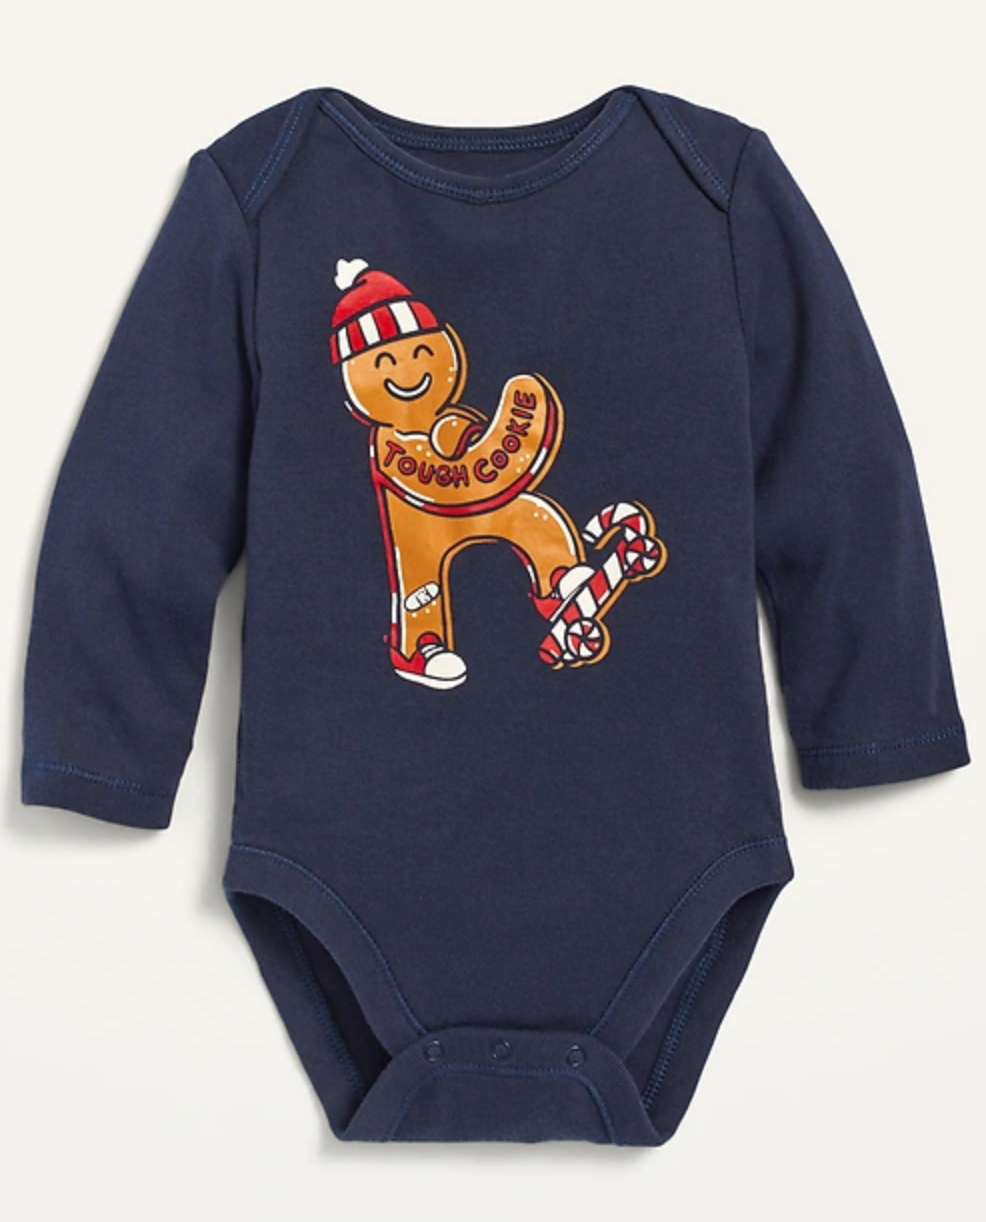 Tough Cookie Long Sleeve Holiday Christmas Jumpsuit for Baby 0 - 3 Months